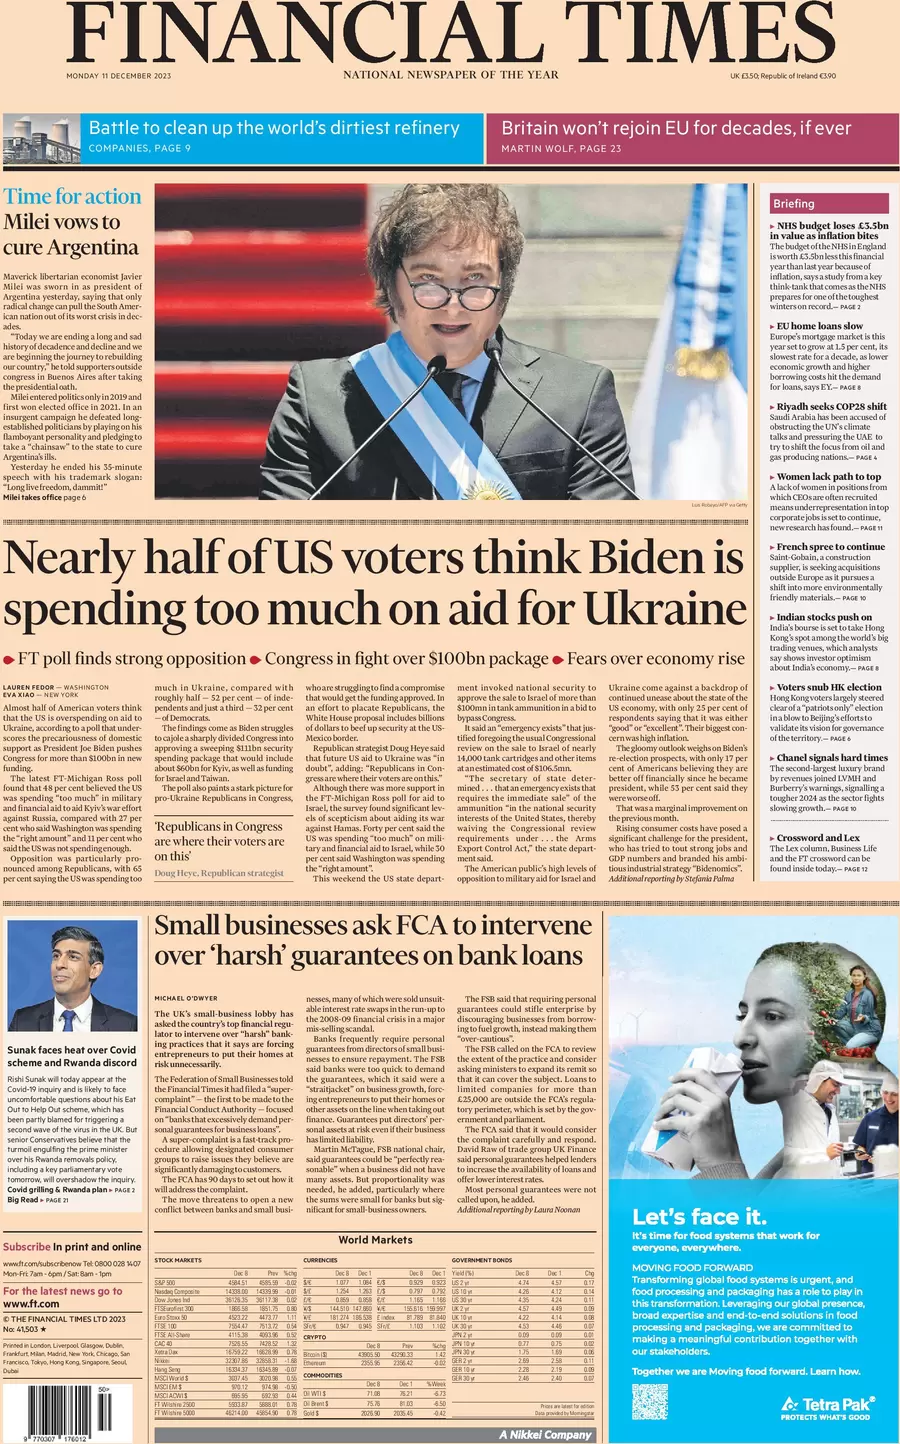 Financial Times - Nearly half US voters think Biden is spending too much on aid for Ukraine 